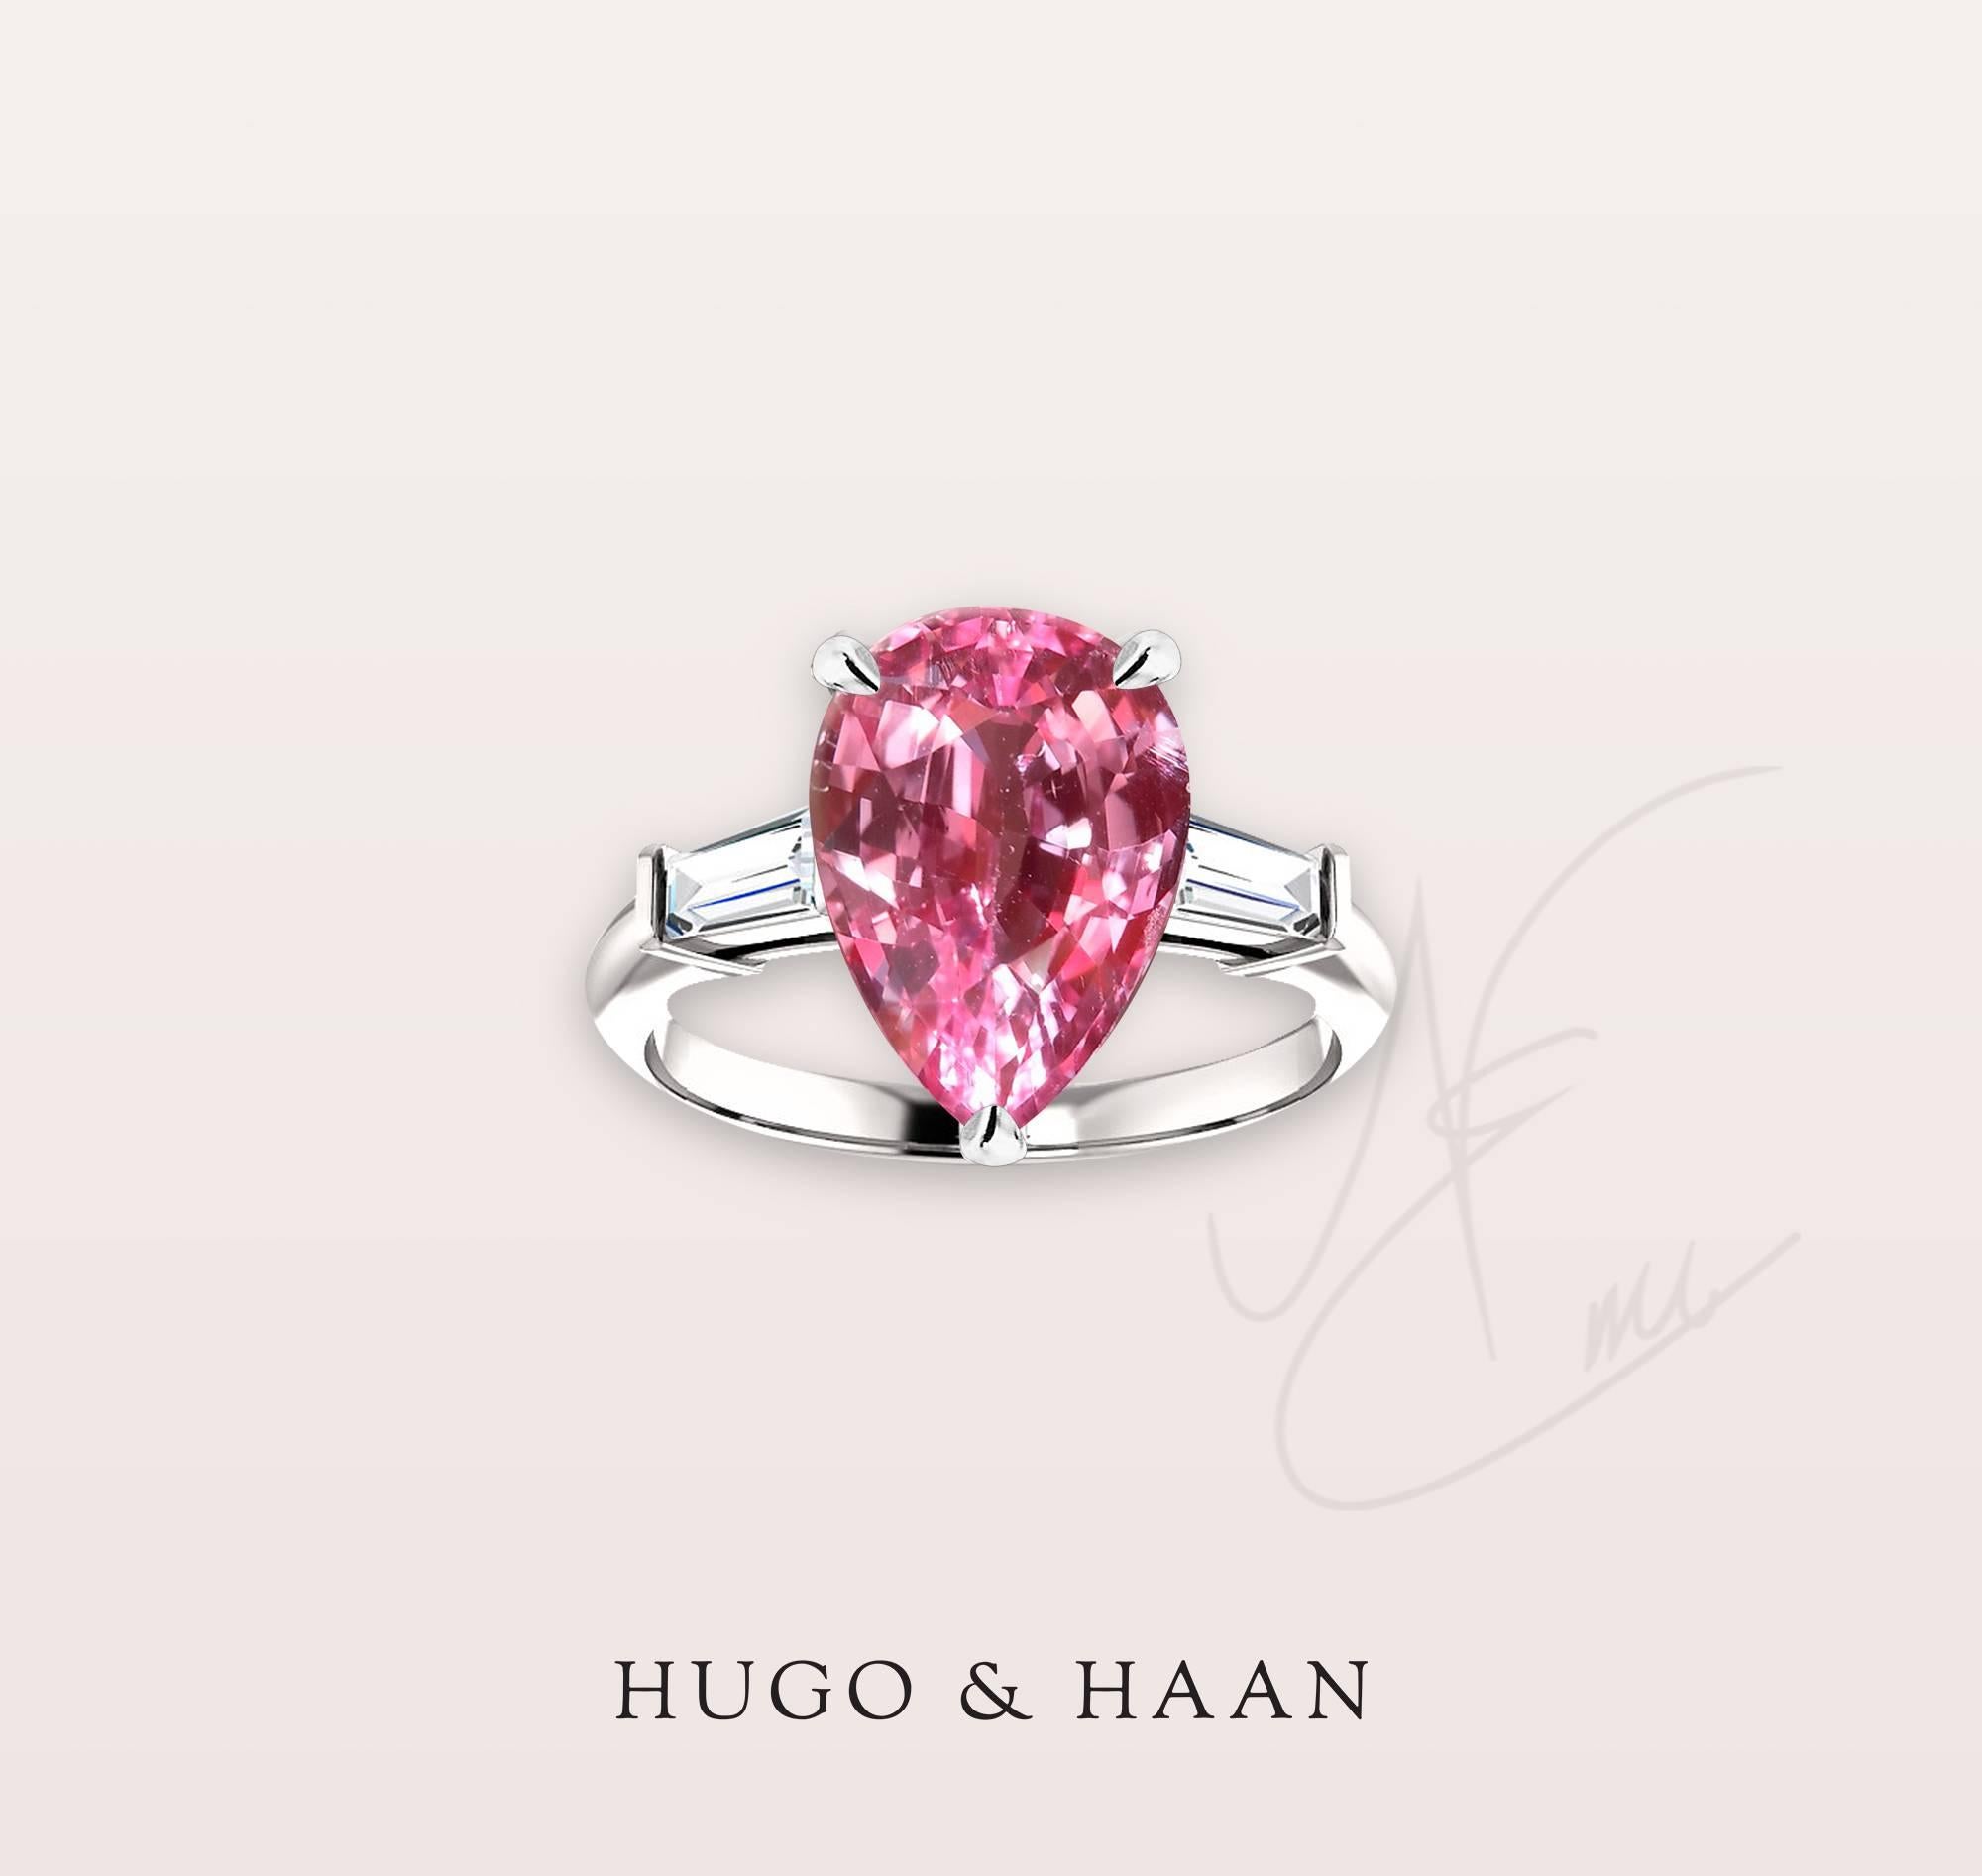 Details:

- Pear Cut Pink Tourmaline
- Tapered Baguette White Diamonds on the side
- 18kt White Gold
- Can be created in 18k Rose Gold as well

About Hugo and Haan Fine Jewellery:  

Please note that all of our jewels are custom created for you,